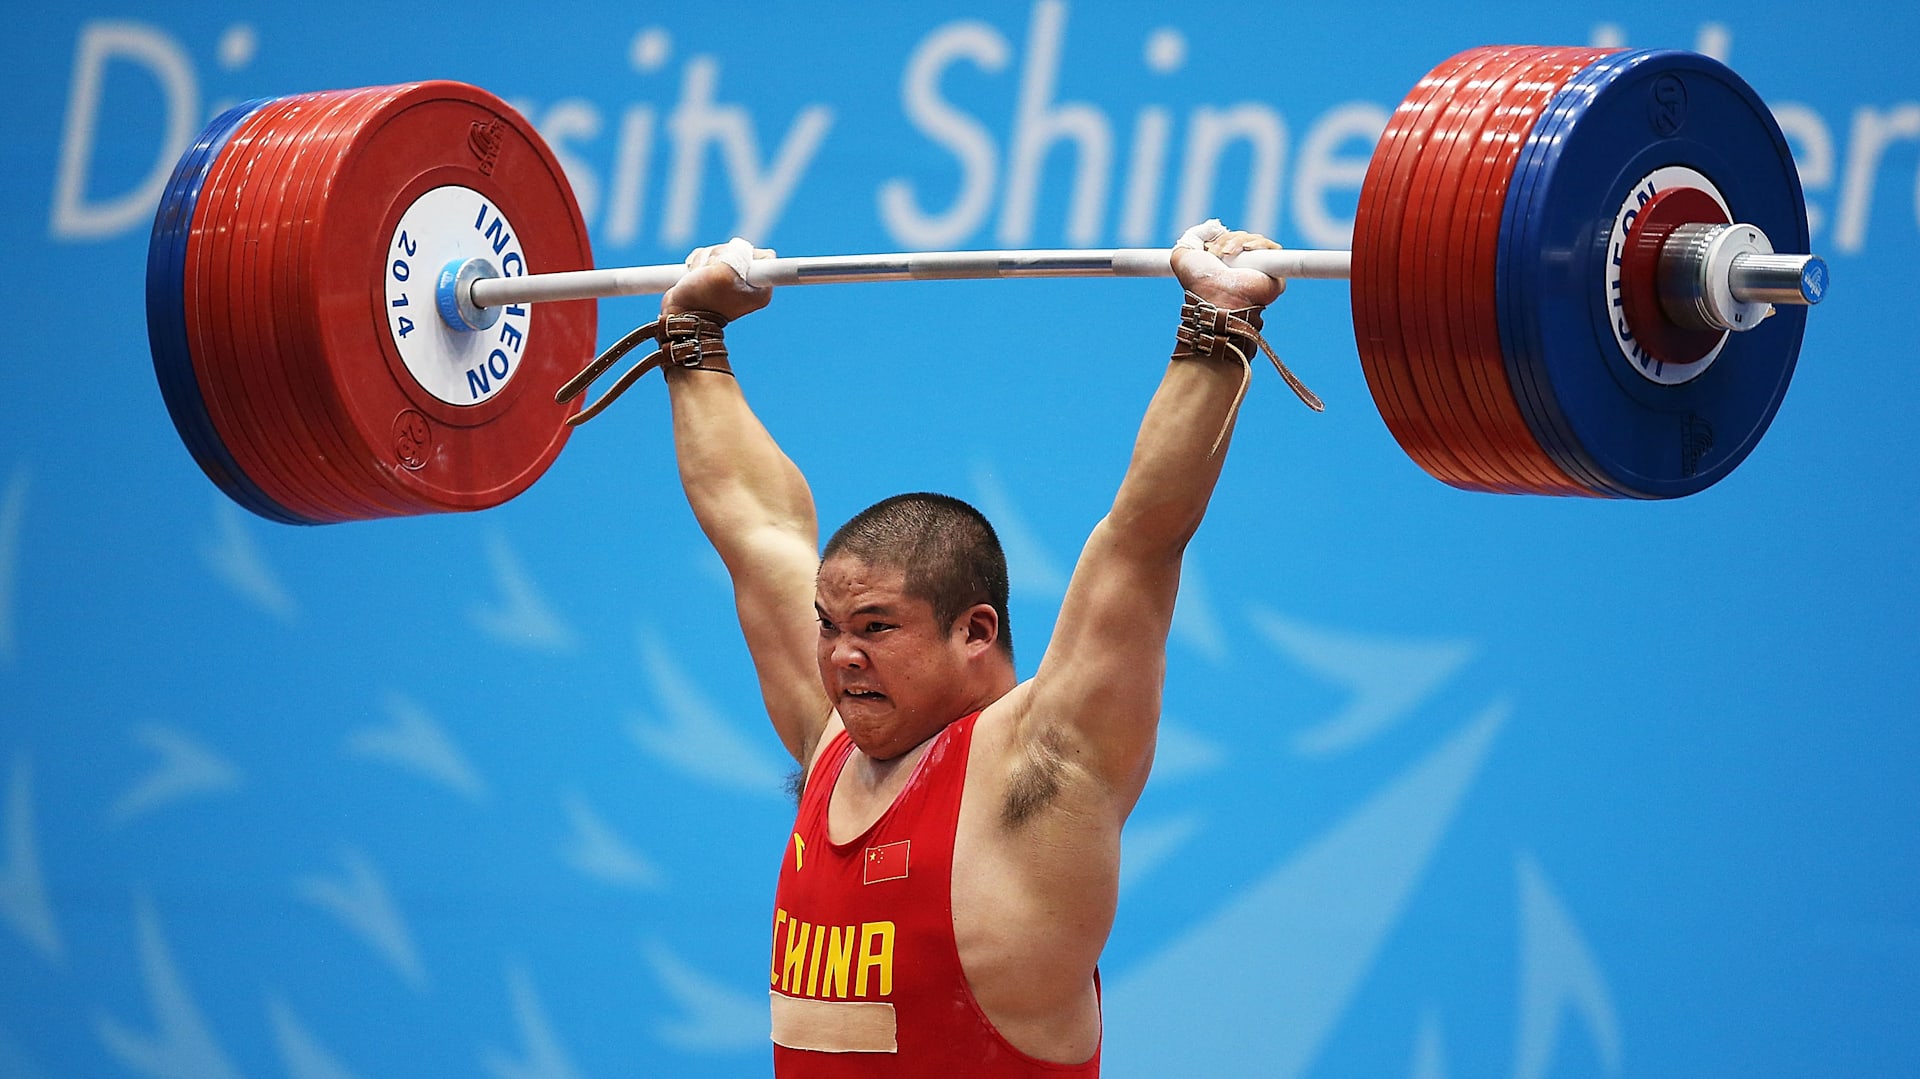 2018 IWF Weightlifting World Championships Who and how to watch